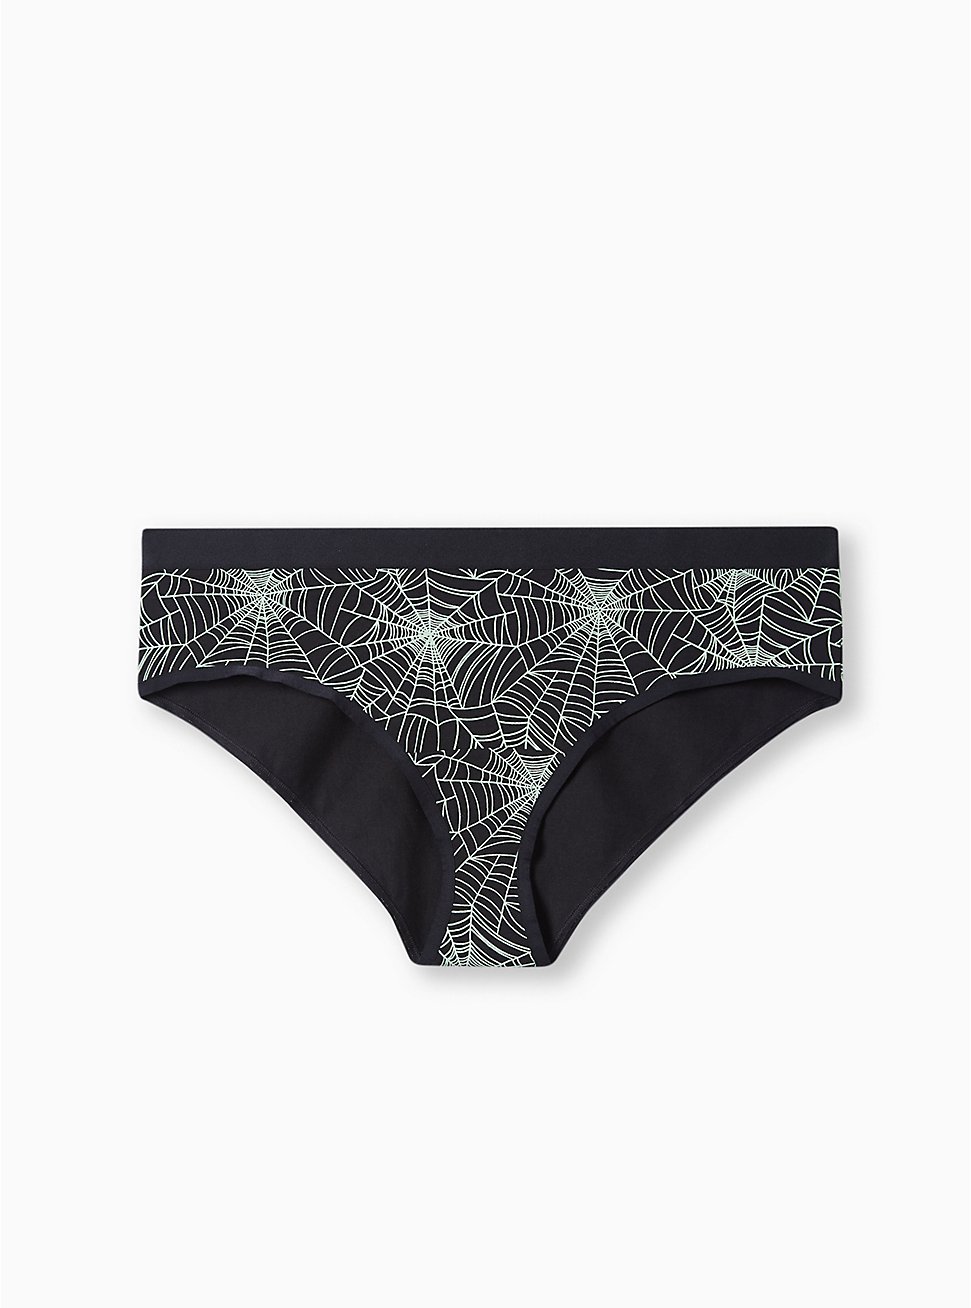 Cotton Mid-Rise Hipster Panty, DISTRESSED SPIDERWEBS BLACK, hi-res